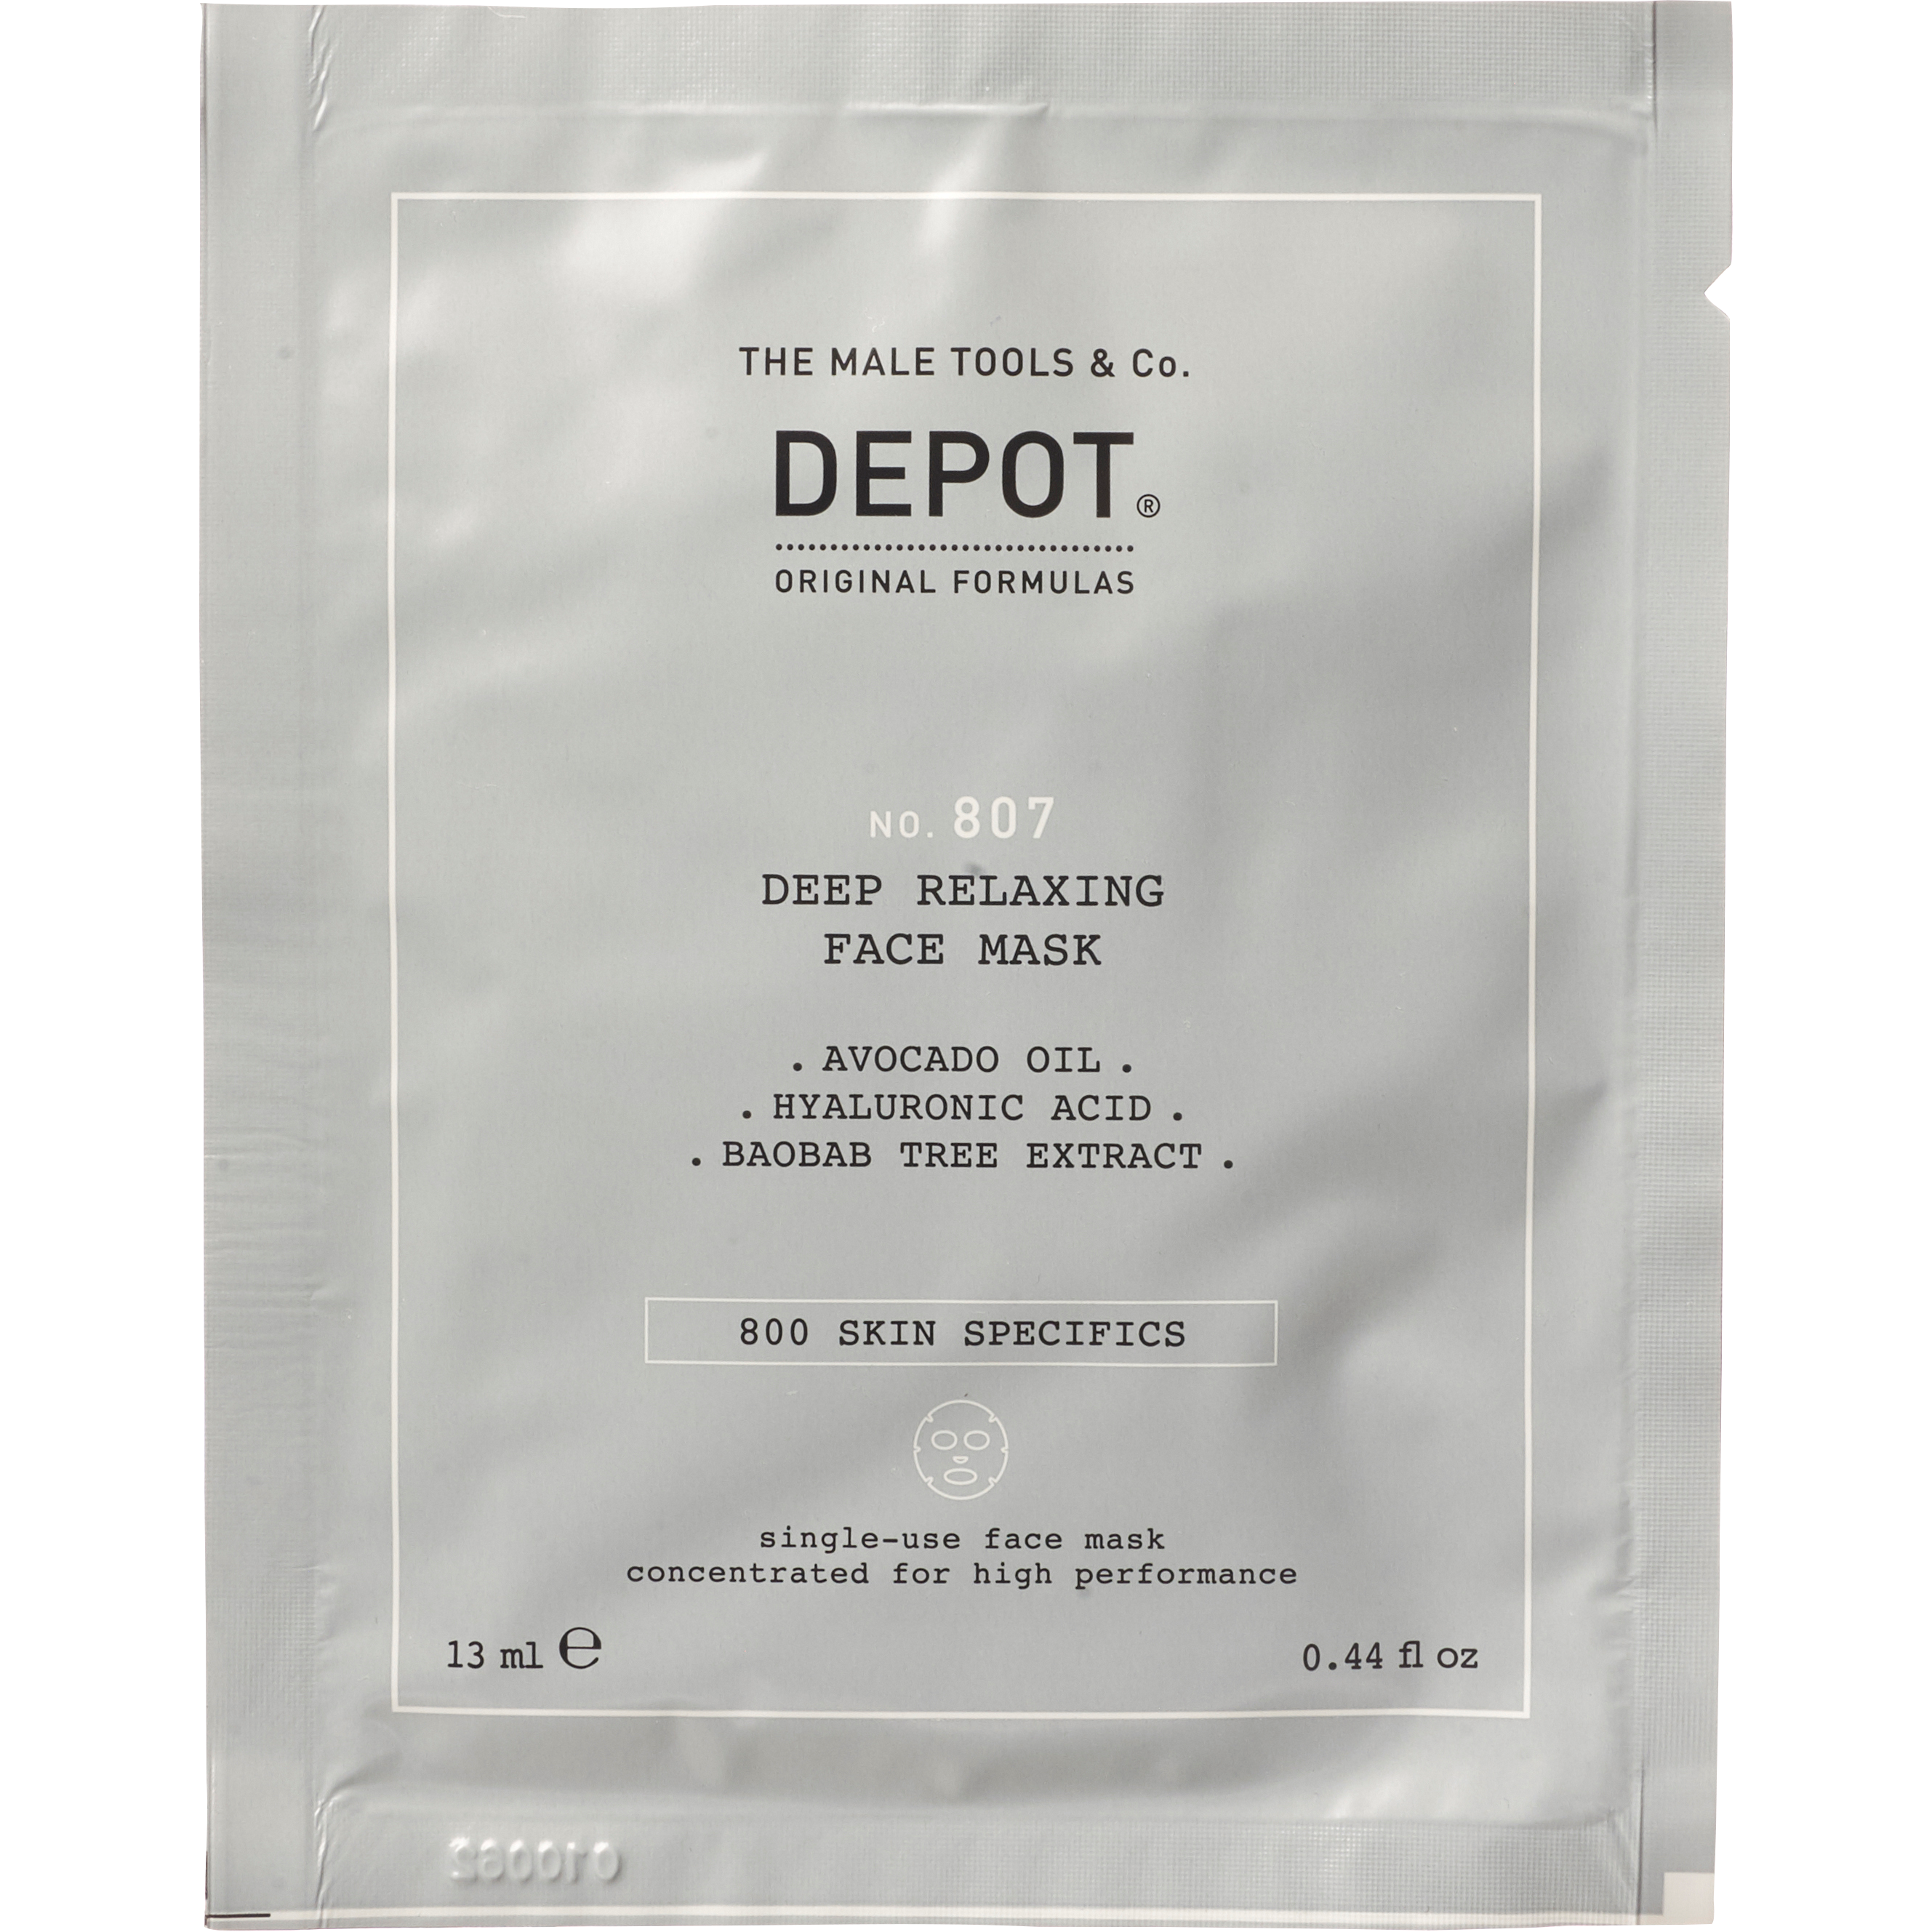 DEPOT MALE TOOLS No. 807 Deep Relaxing Face Mask 13 ml